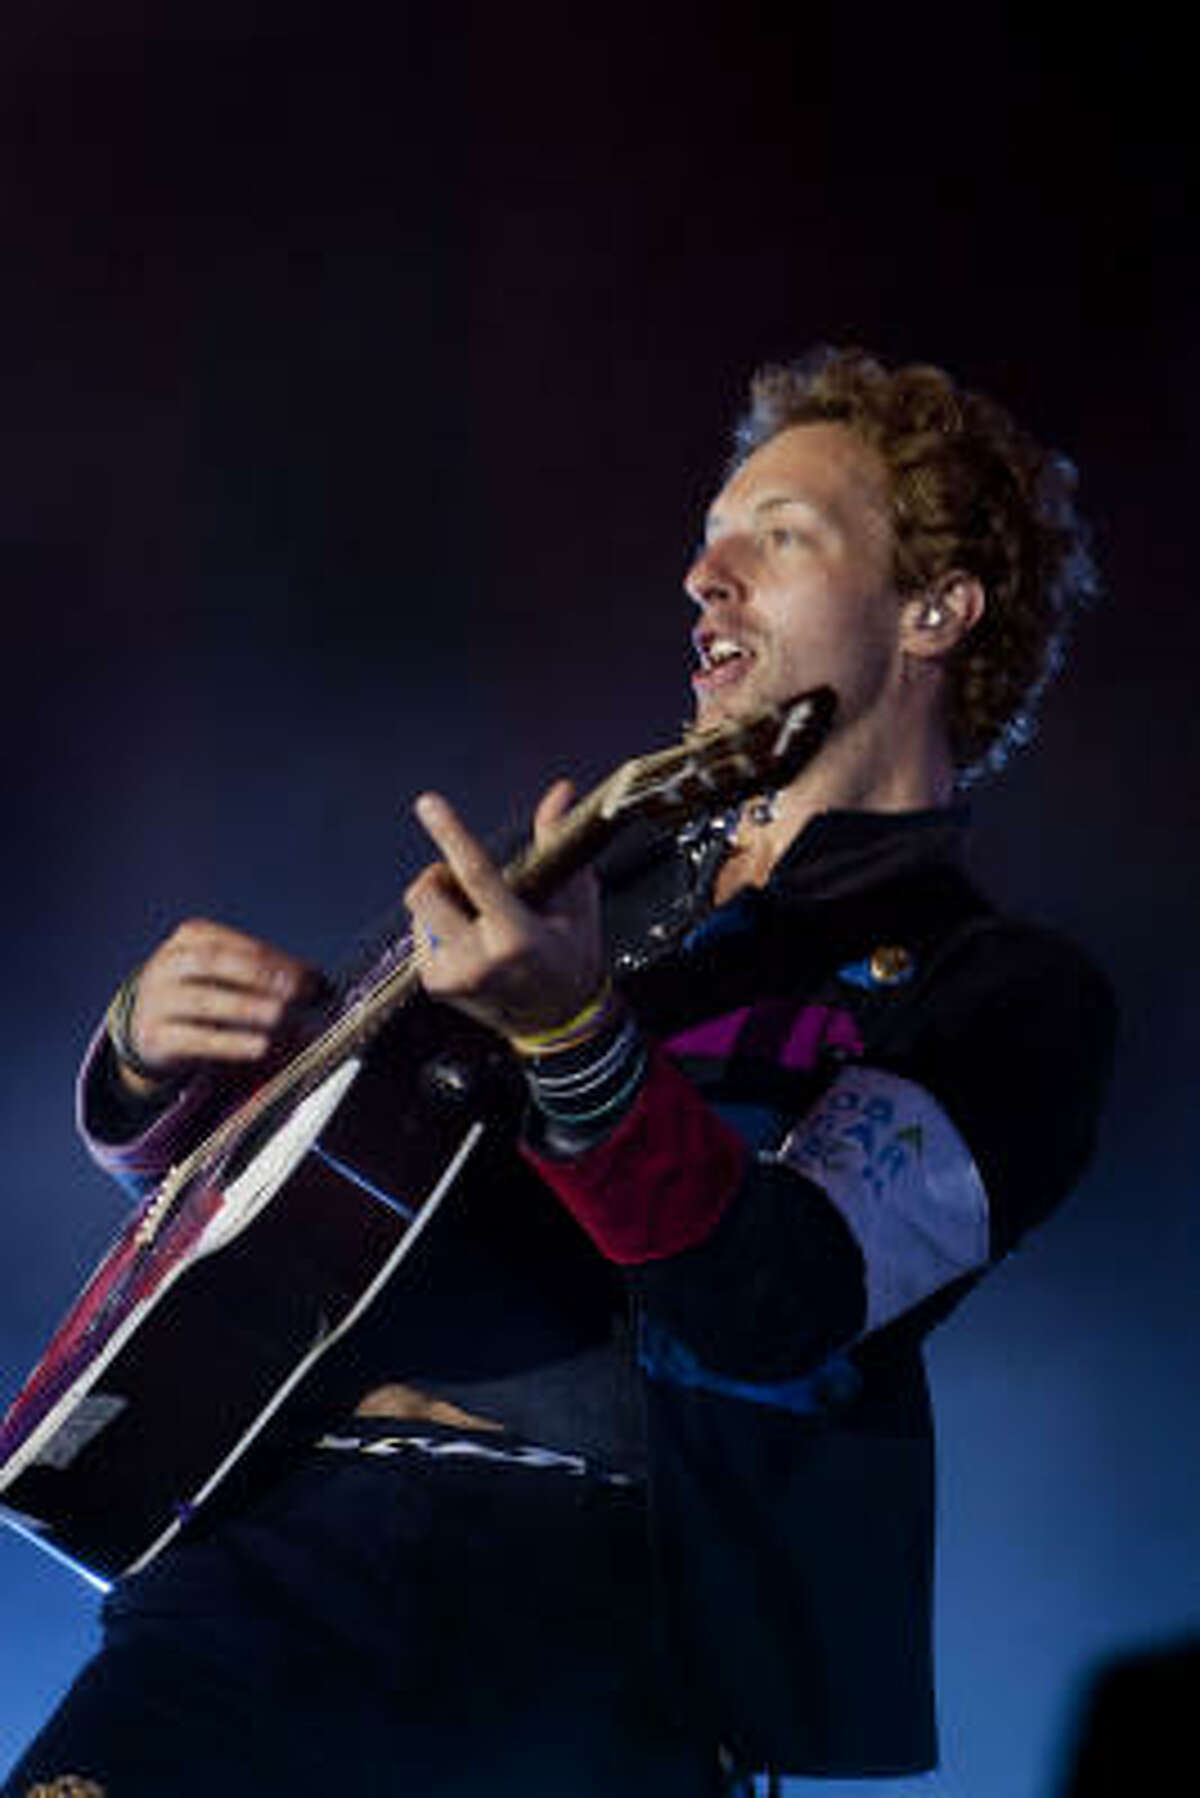 Coldplay comes to The Woodlands next week.